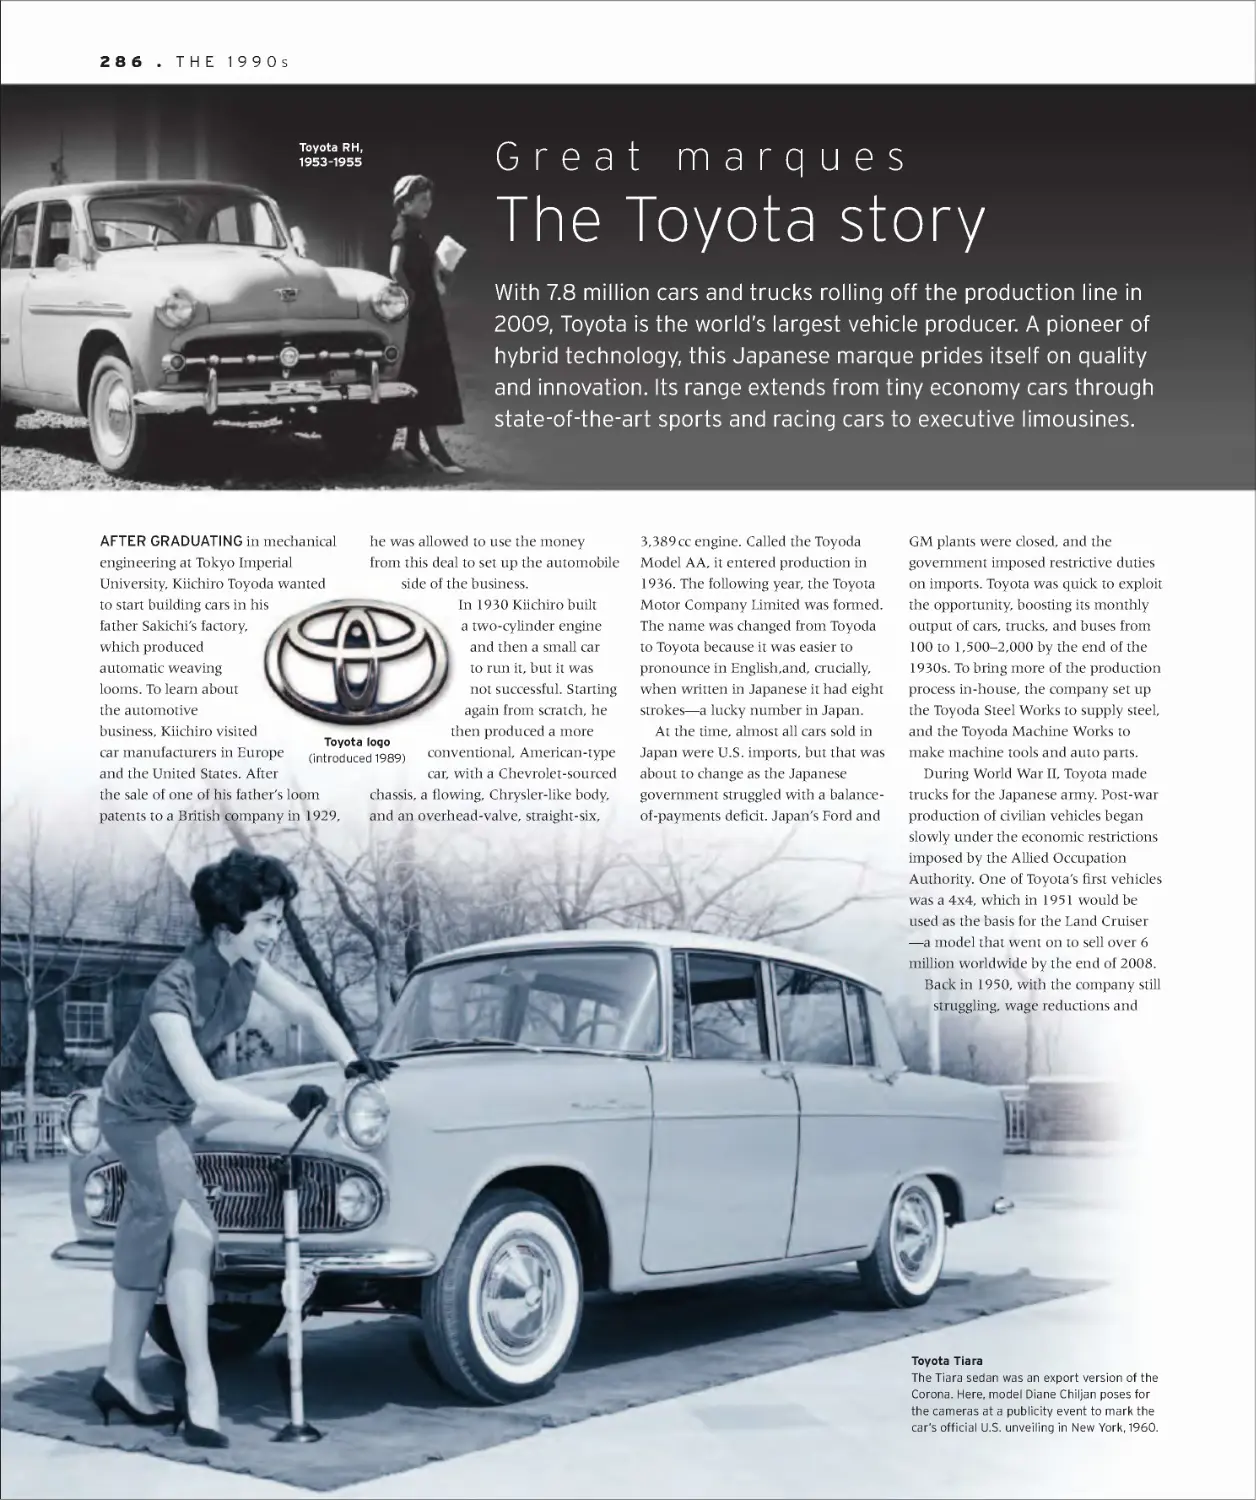 Great marques: The Toyota story 286